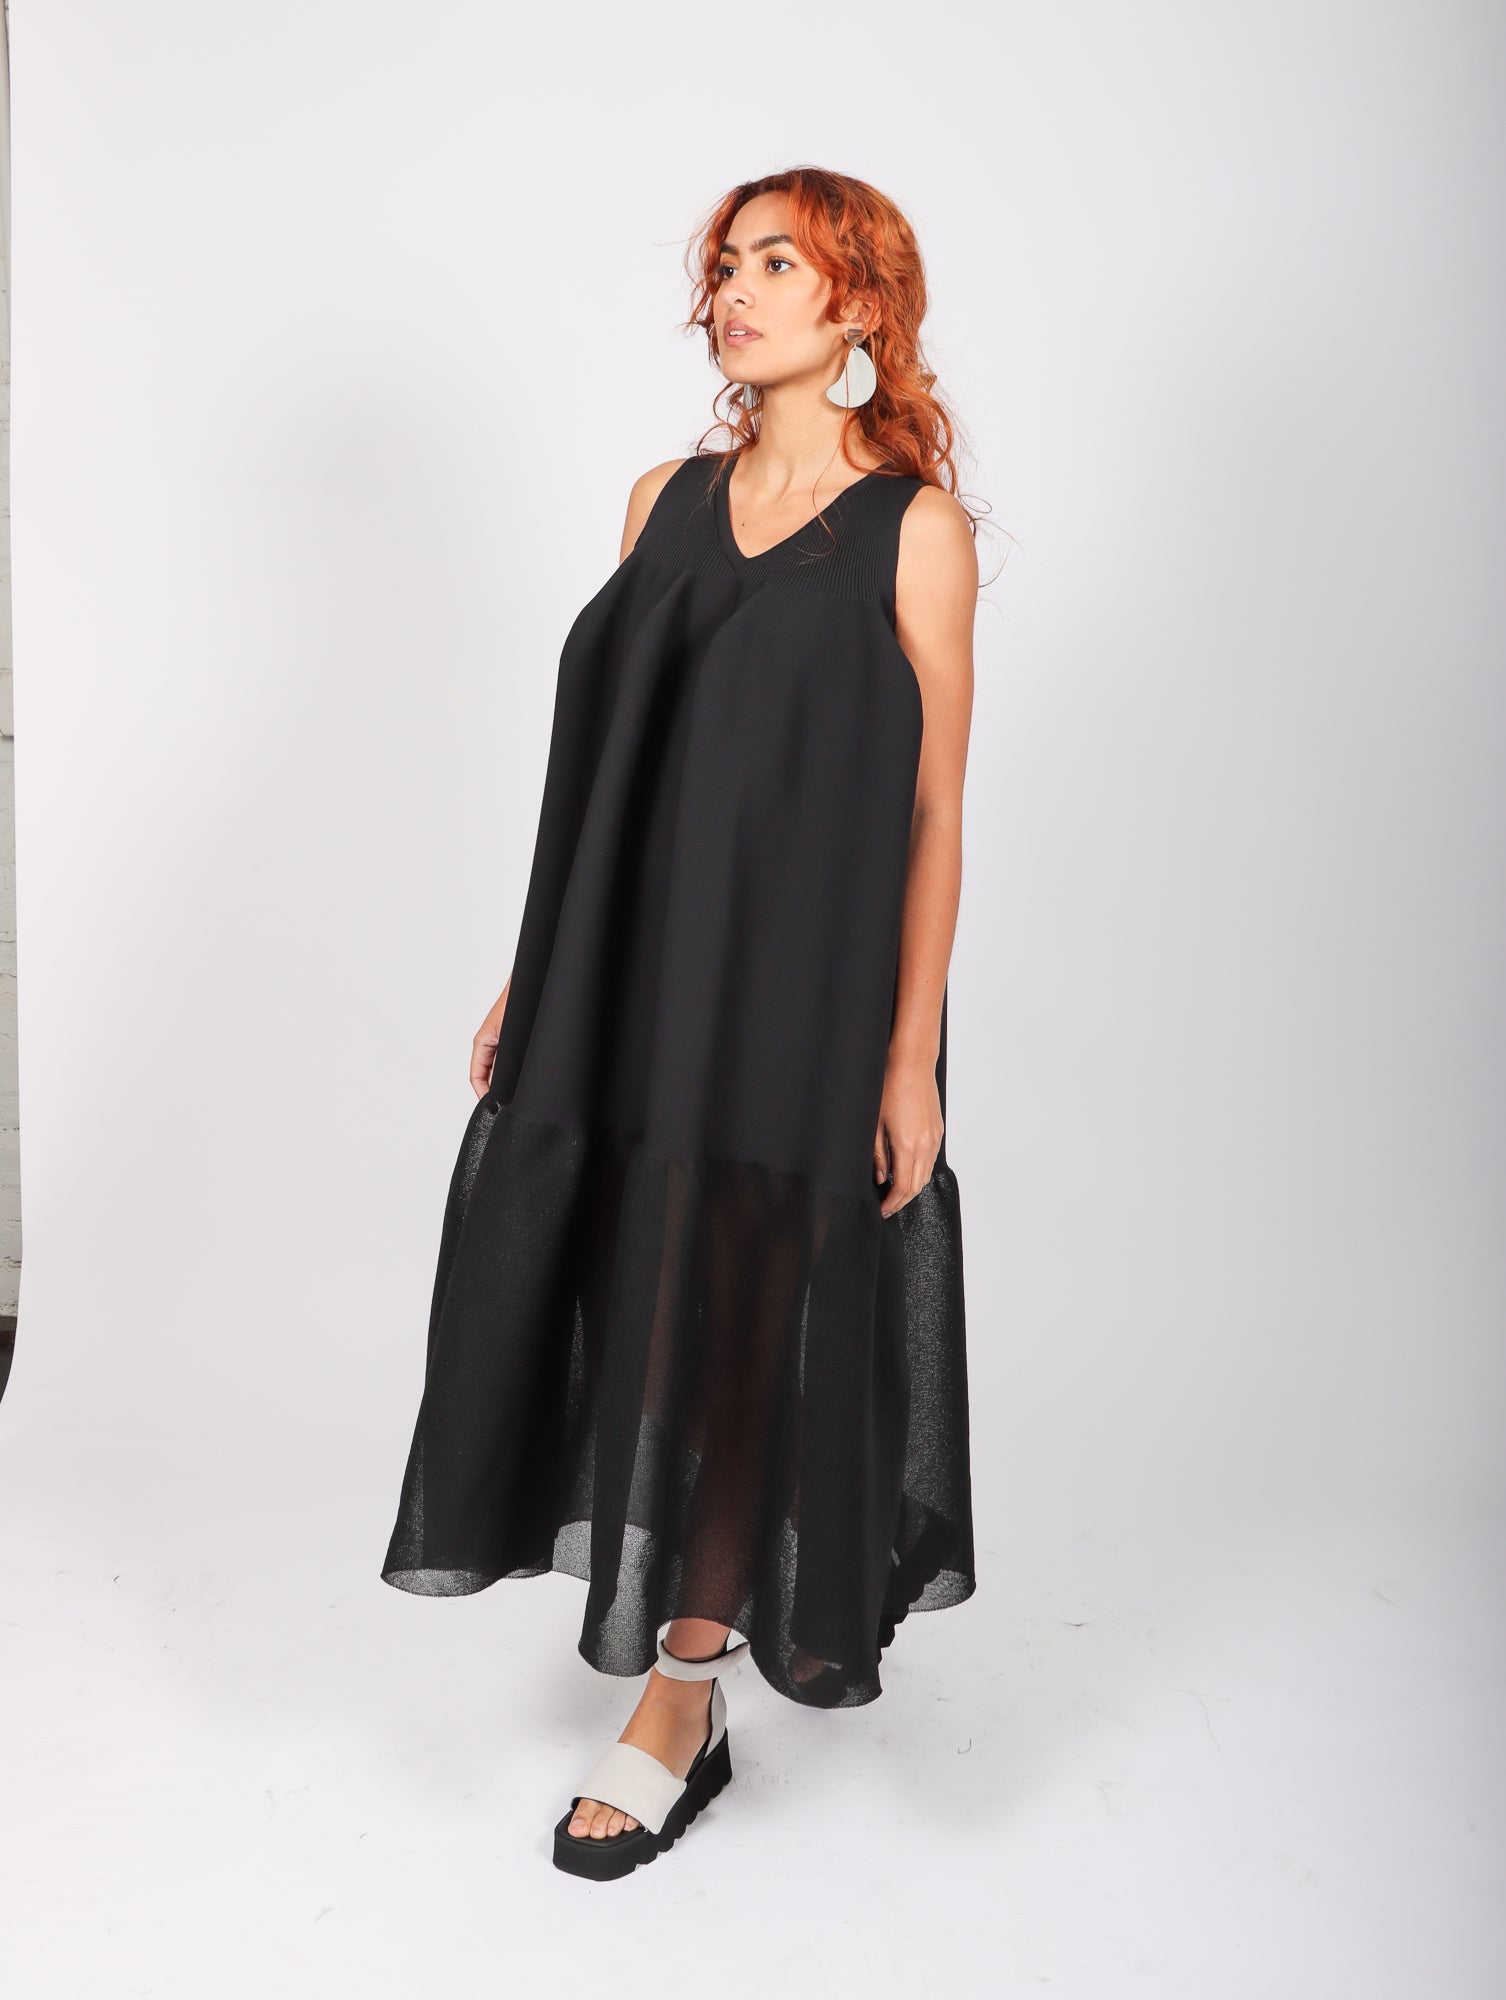 Pottery Lucent Dress 2 in Black by CFCL